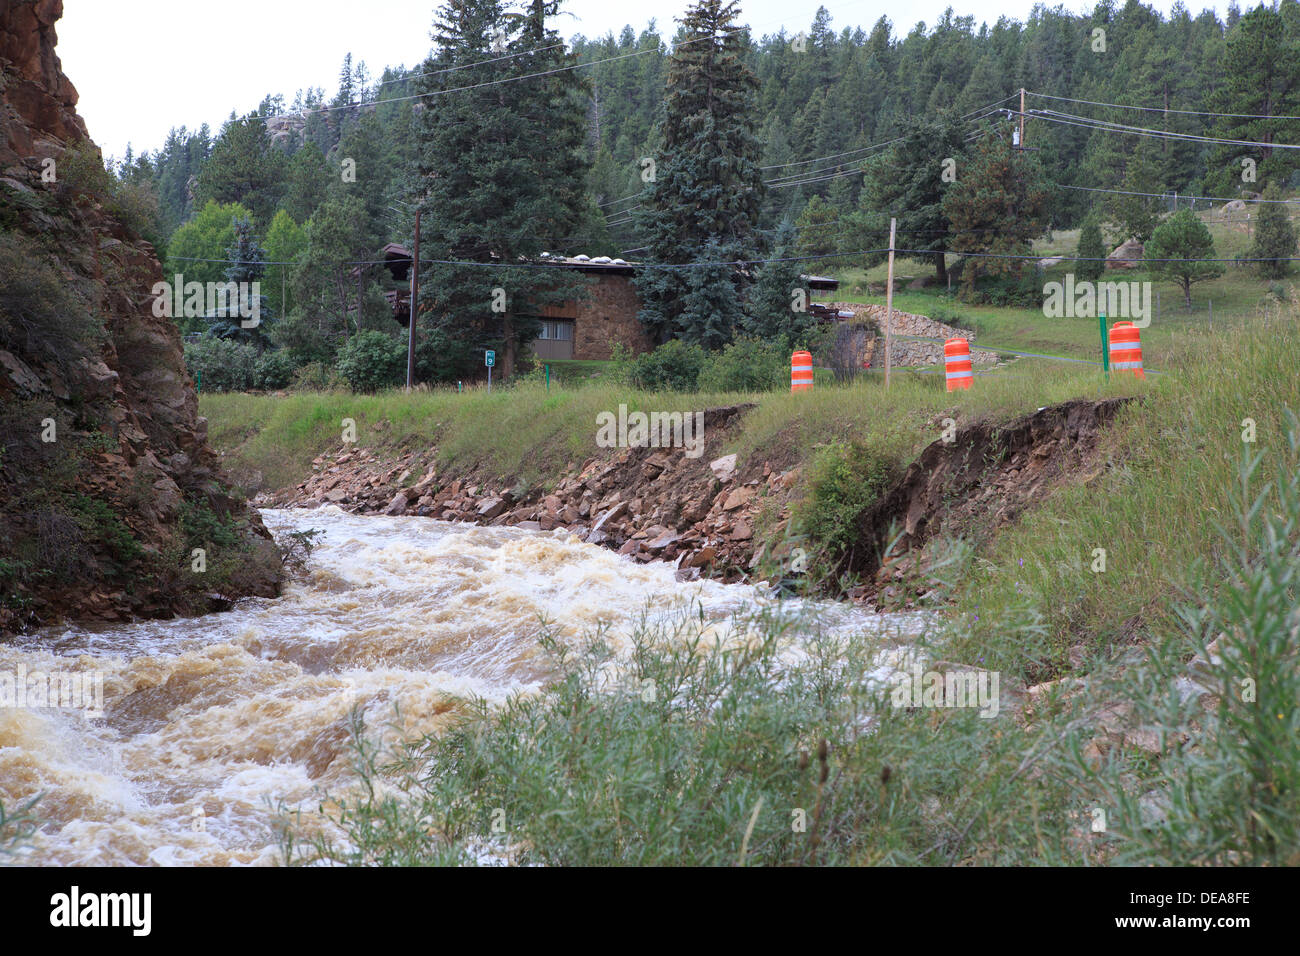 Evergreen, CO USA.  14 Sept, 2013. Portions of Highway 74 into Evergreen are in danger of being washed away due to the flood waters.  Evergreen is expected to receive more rain through Sunday. © Ed Endicott  Alamy Live News Stock Photo